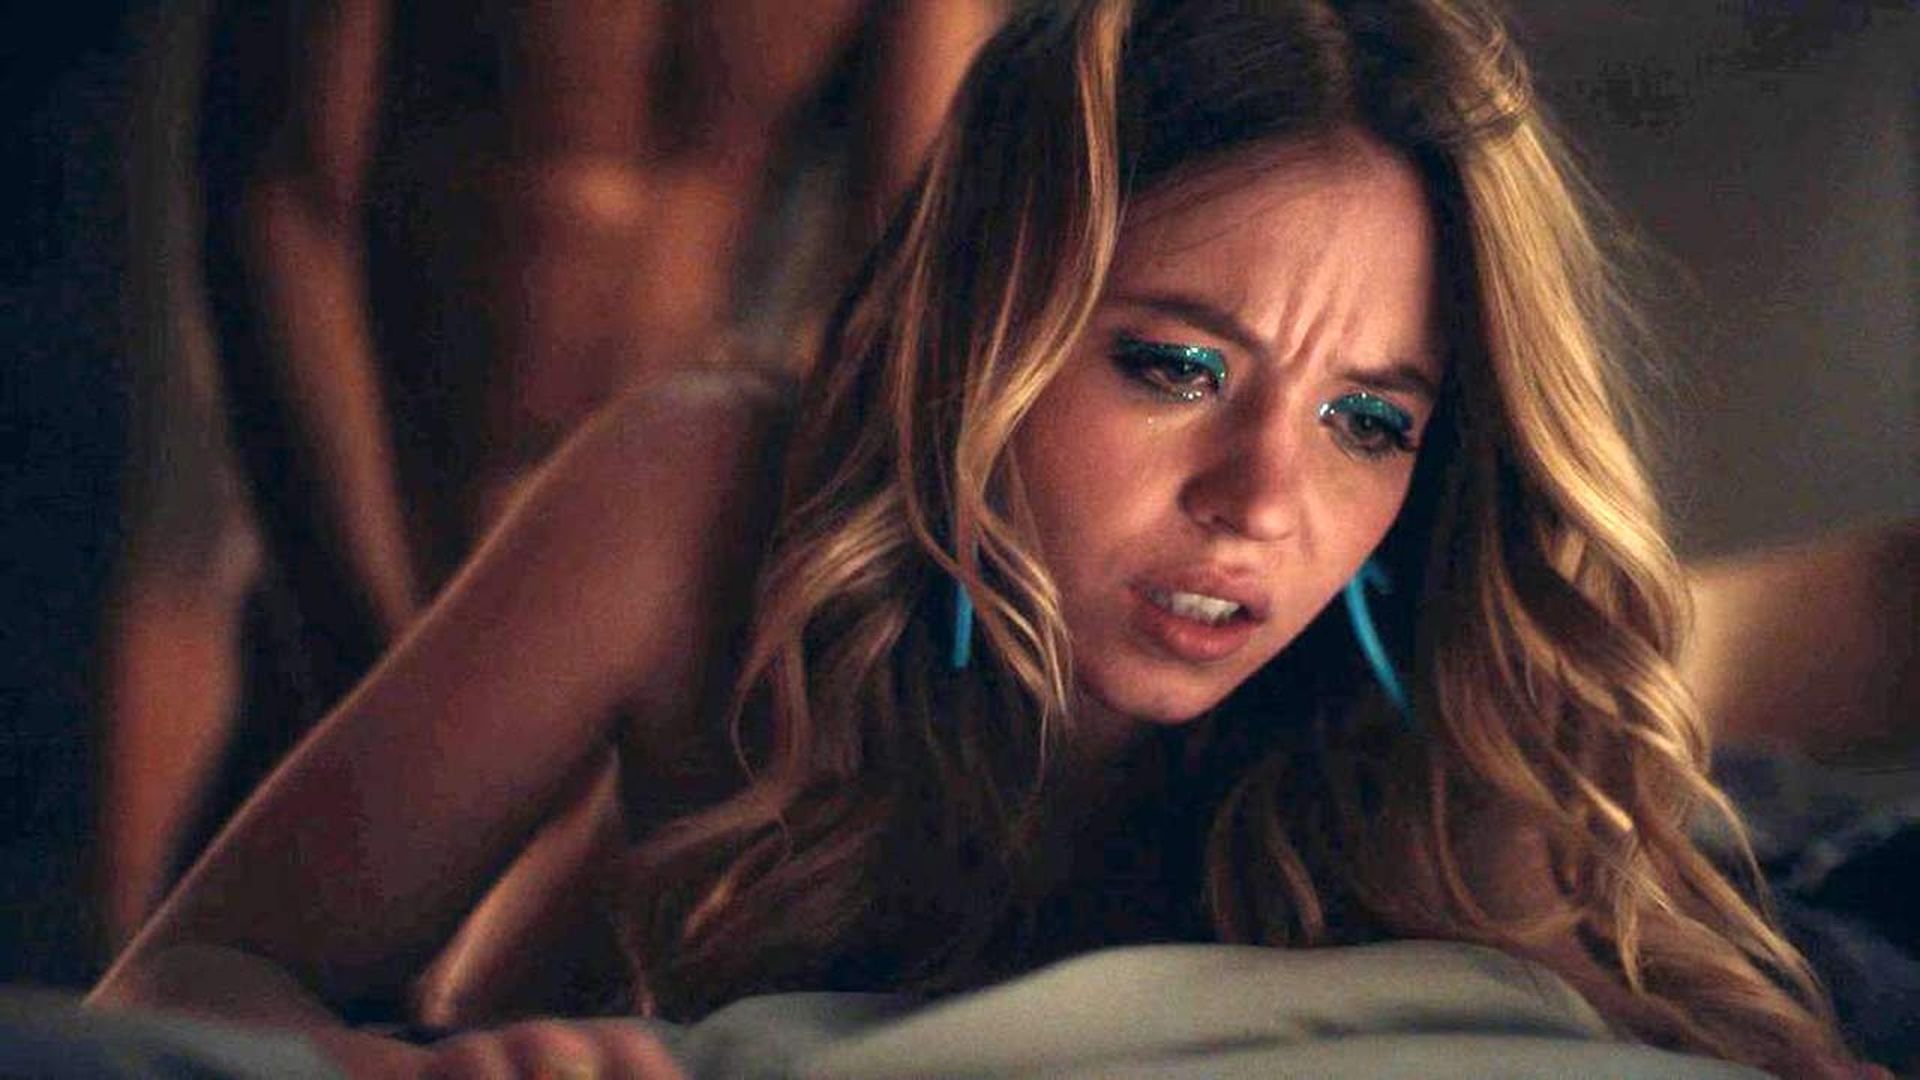 Sydney Sweeney Nude Euphoria 8 Pics And Video Thefappening